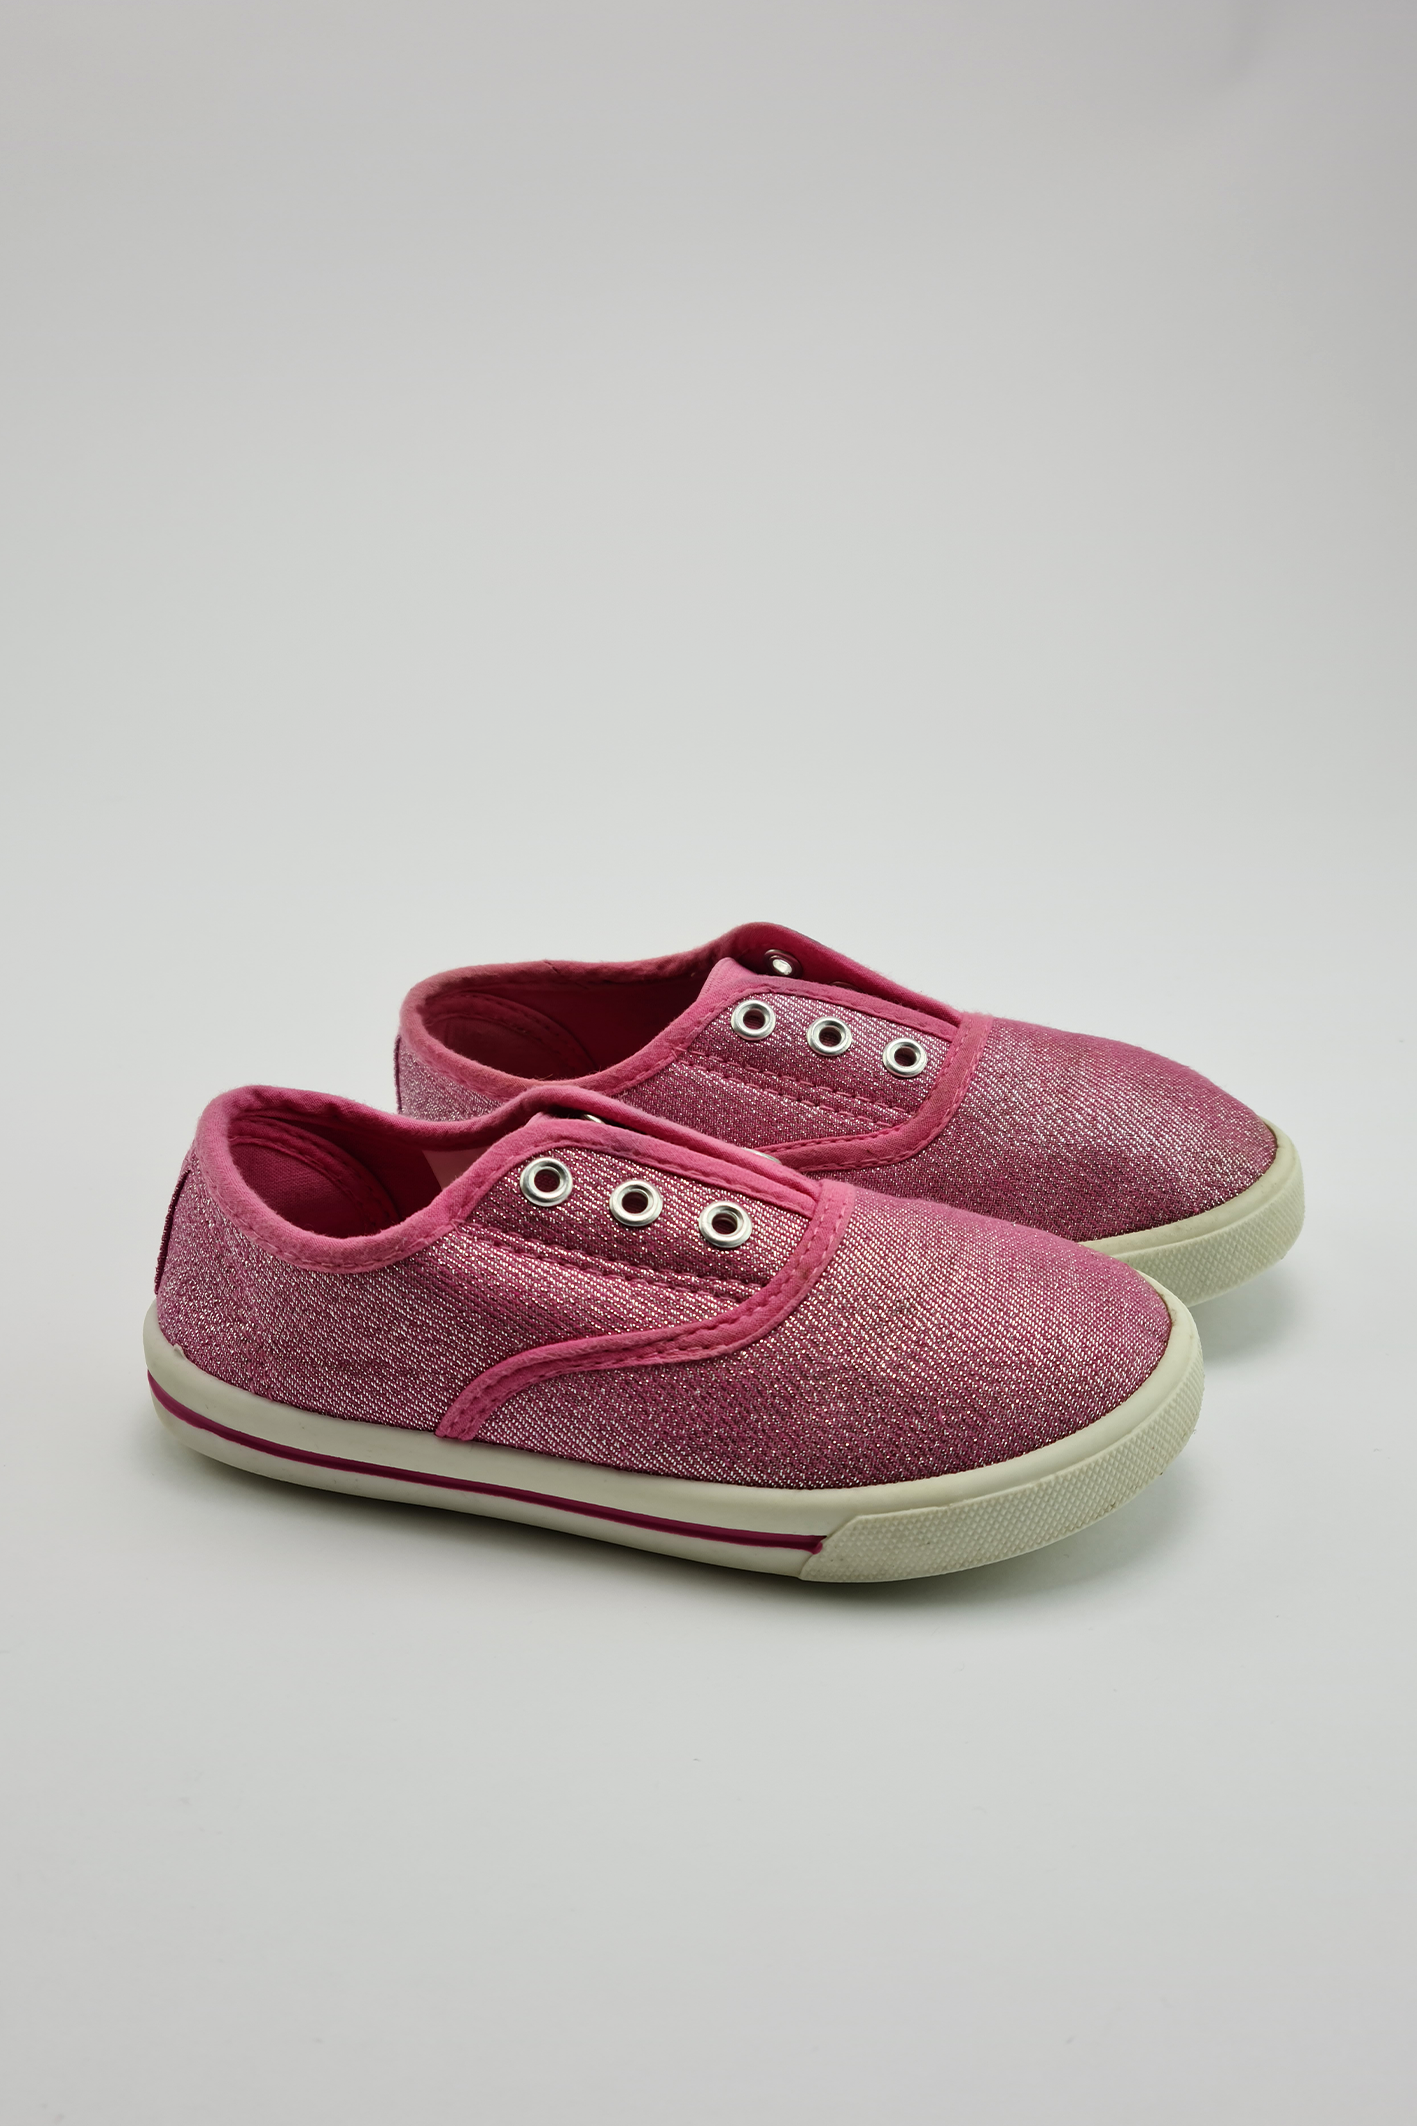 Size 9 - Pink glittery slip-on trinaers